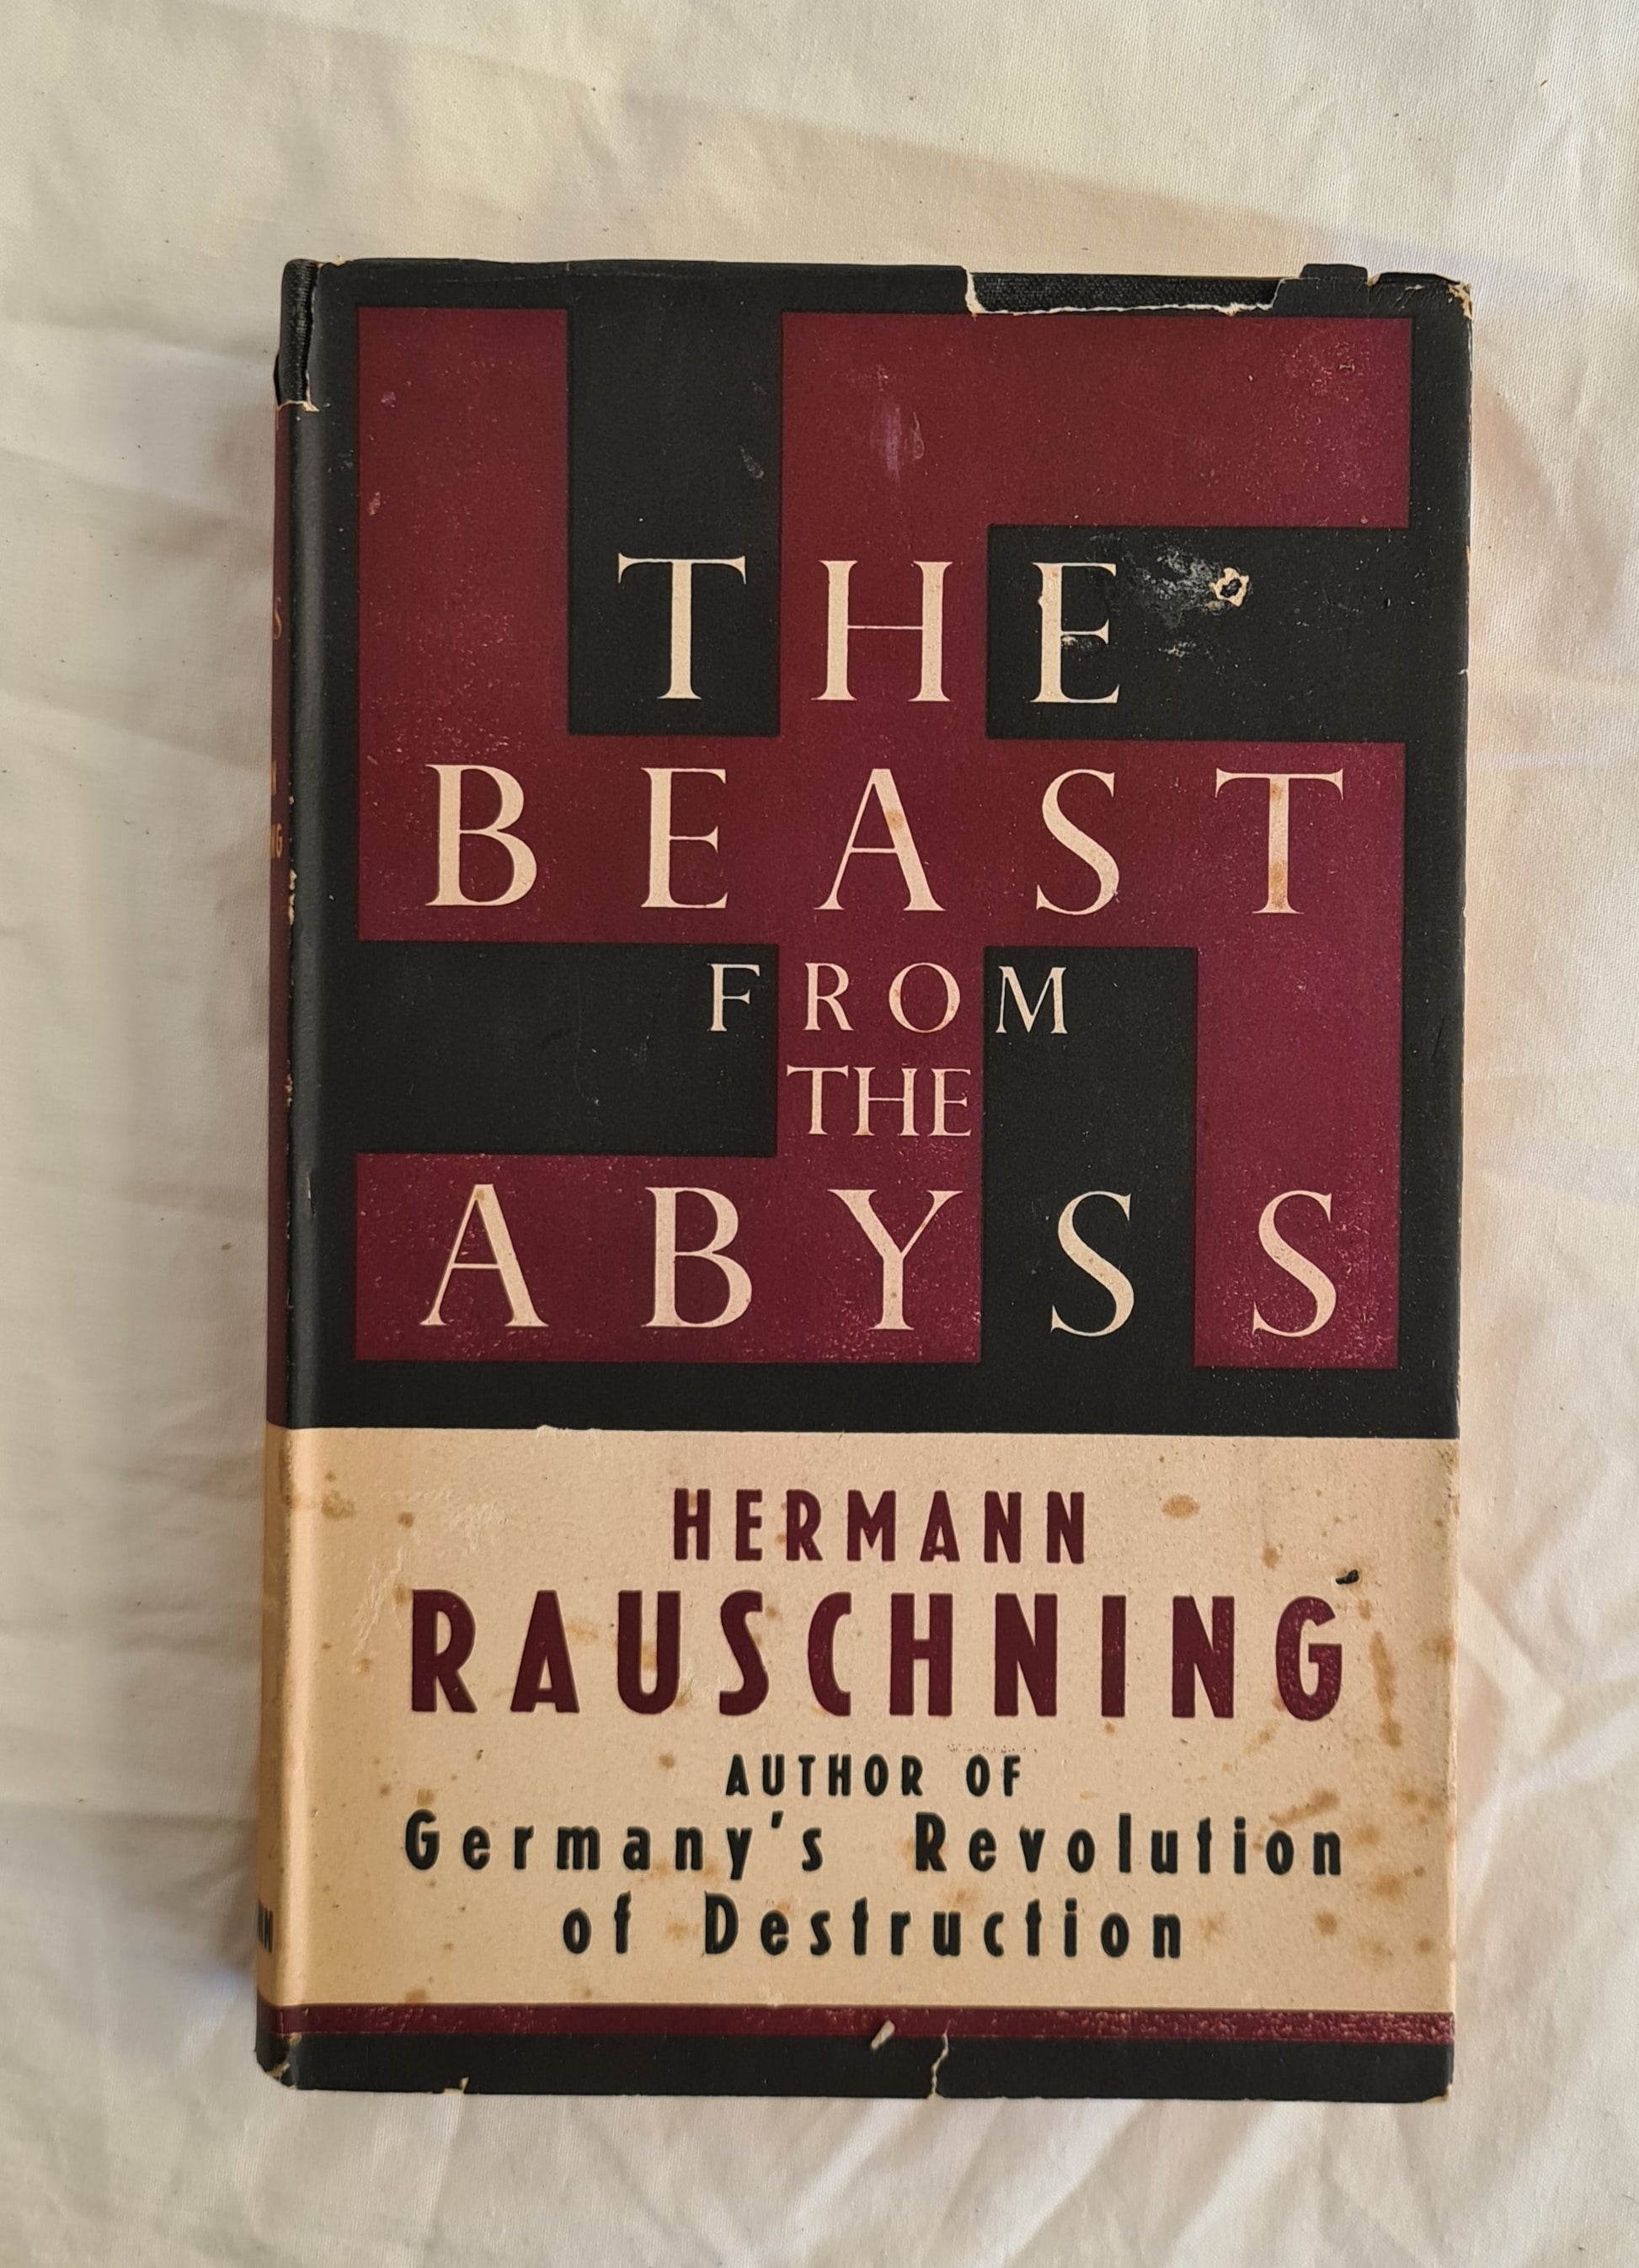 The Beast from the Abyss  by Hermann Rauschning  translated by E. W. Dickes